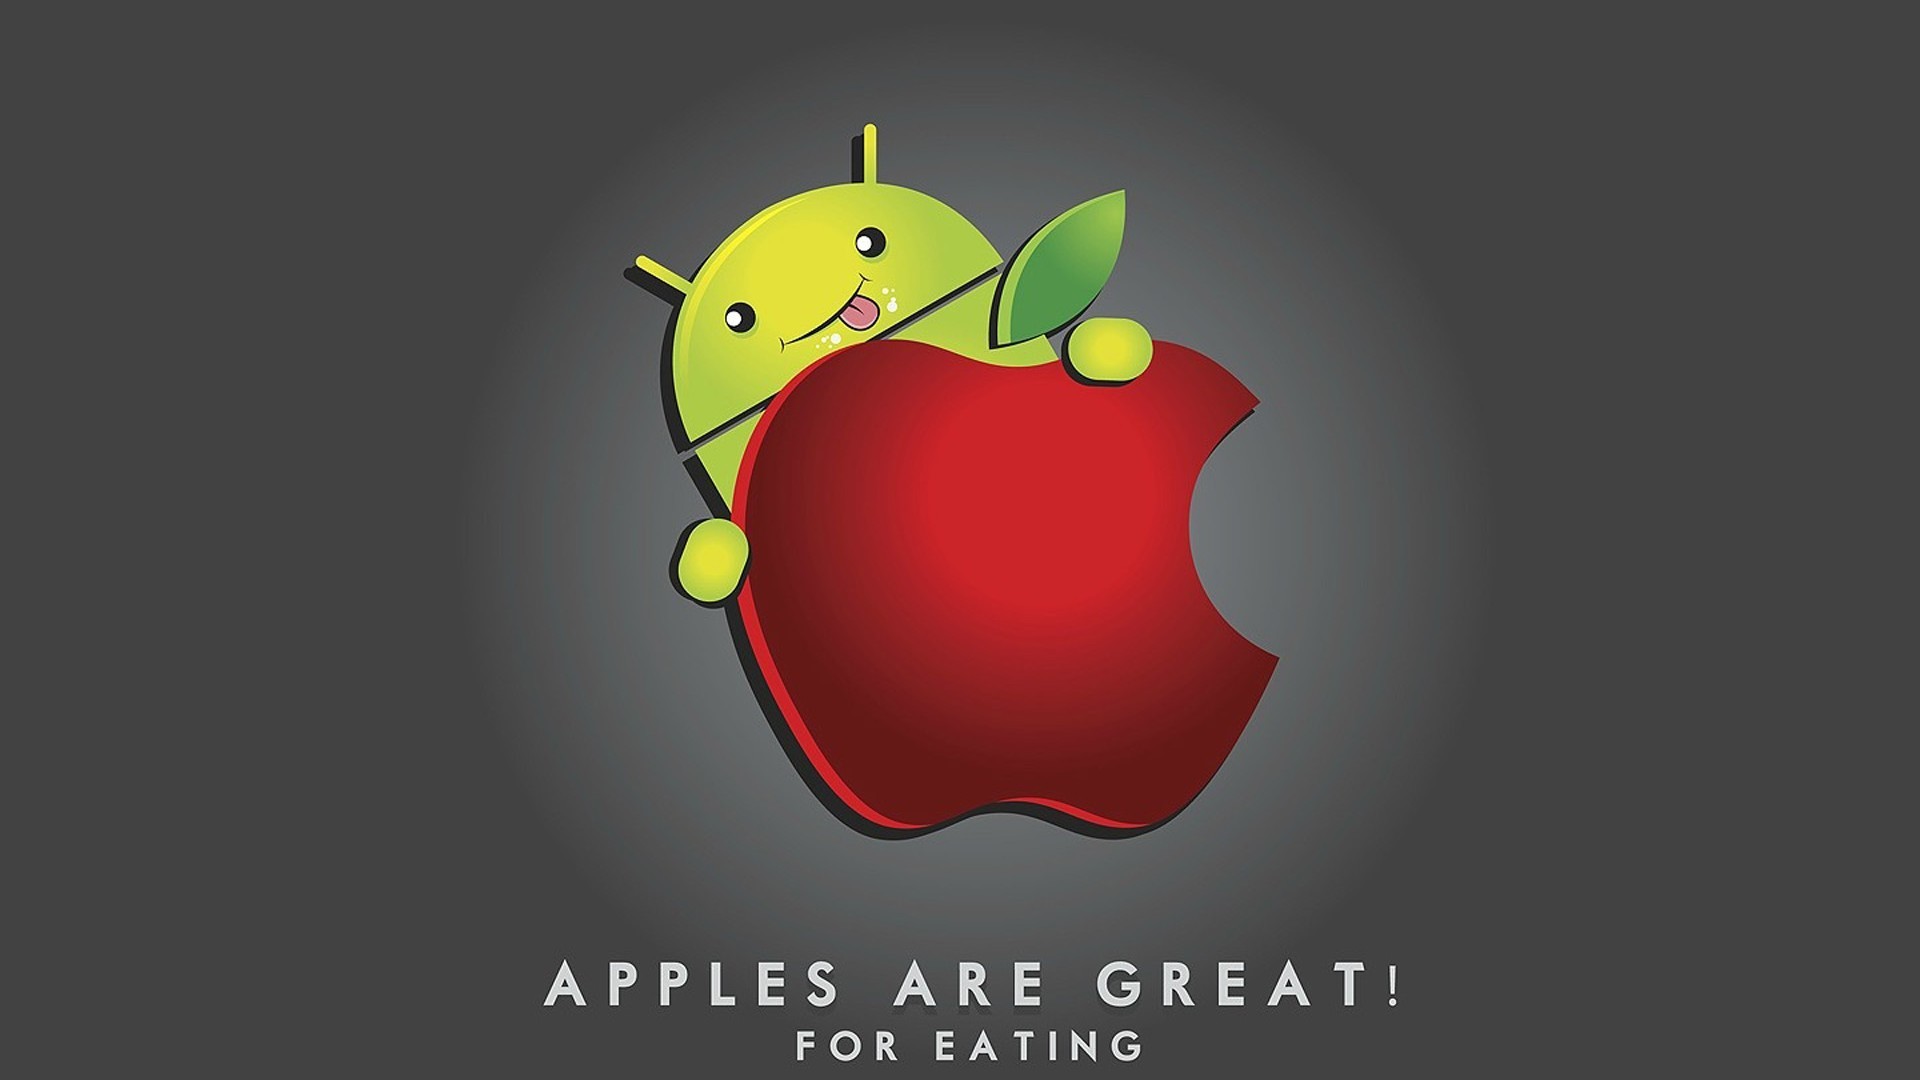 Download Funny Hd Wallpaper In Laptop And Desktop - Apples Are Great For  Eating - 1920x1080 Wallpaper 